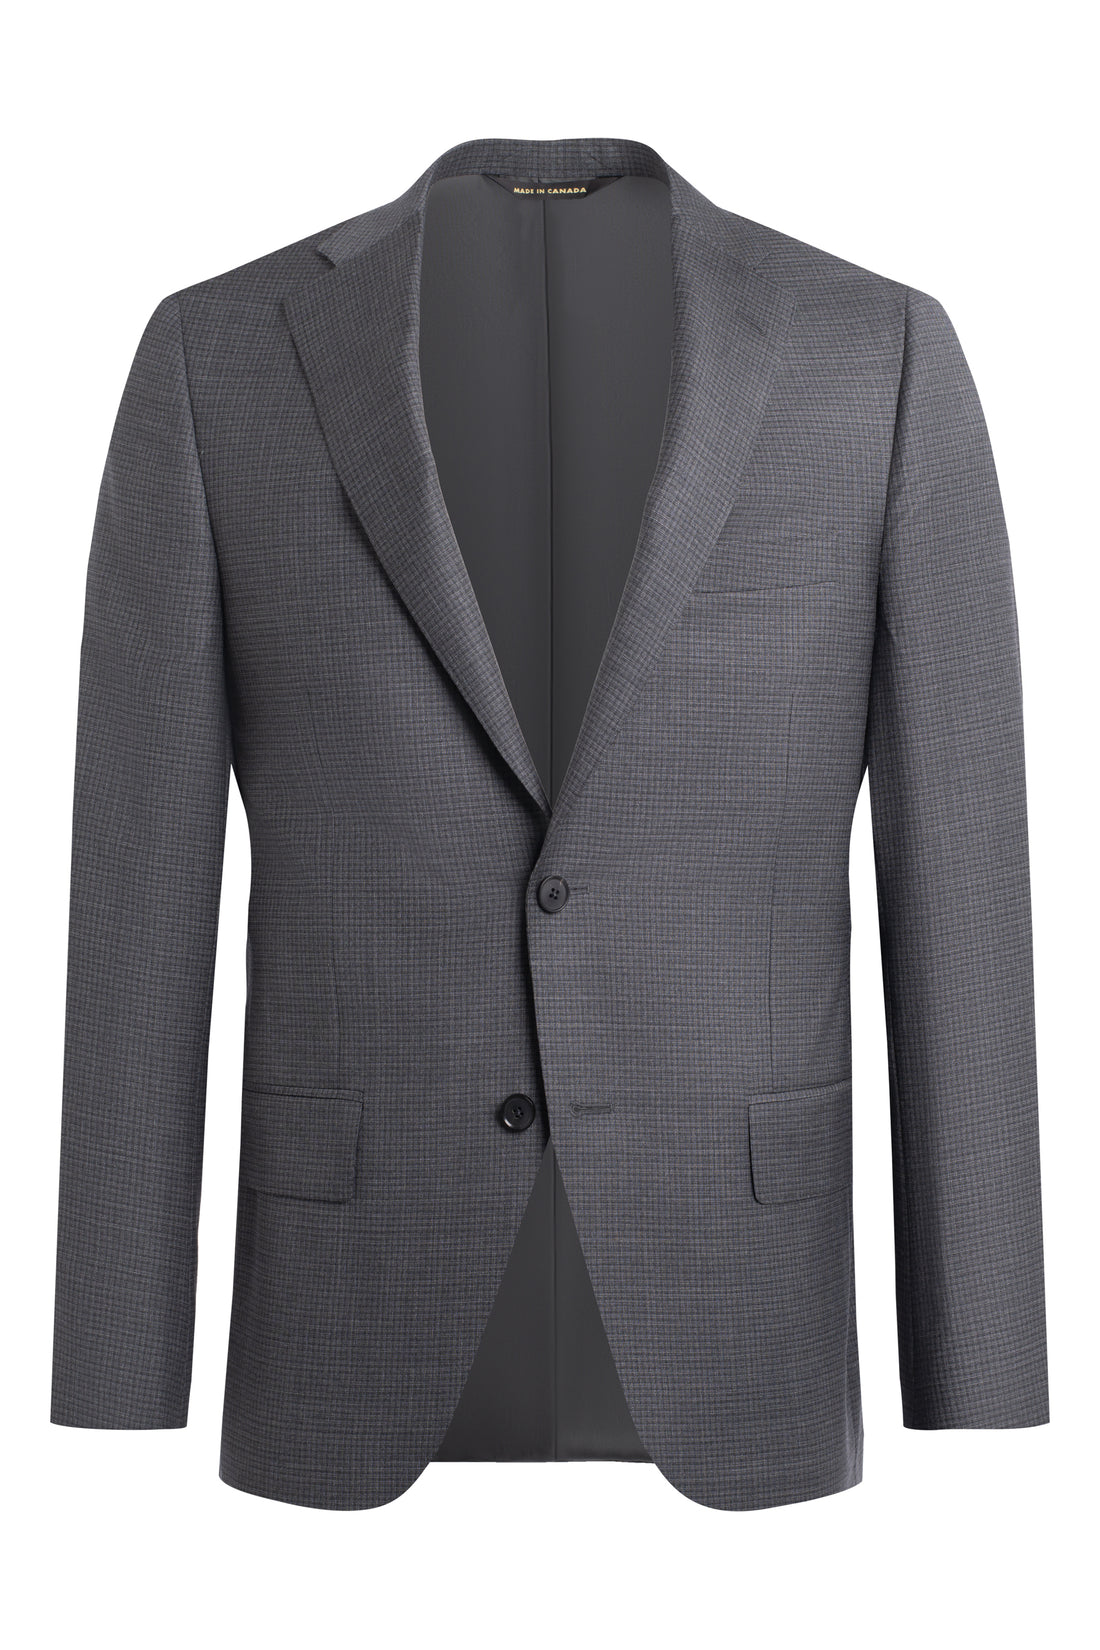 Grey Super 150s Micro Check Suit jacket front